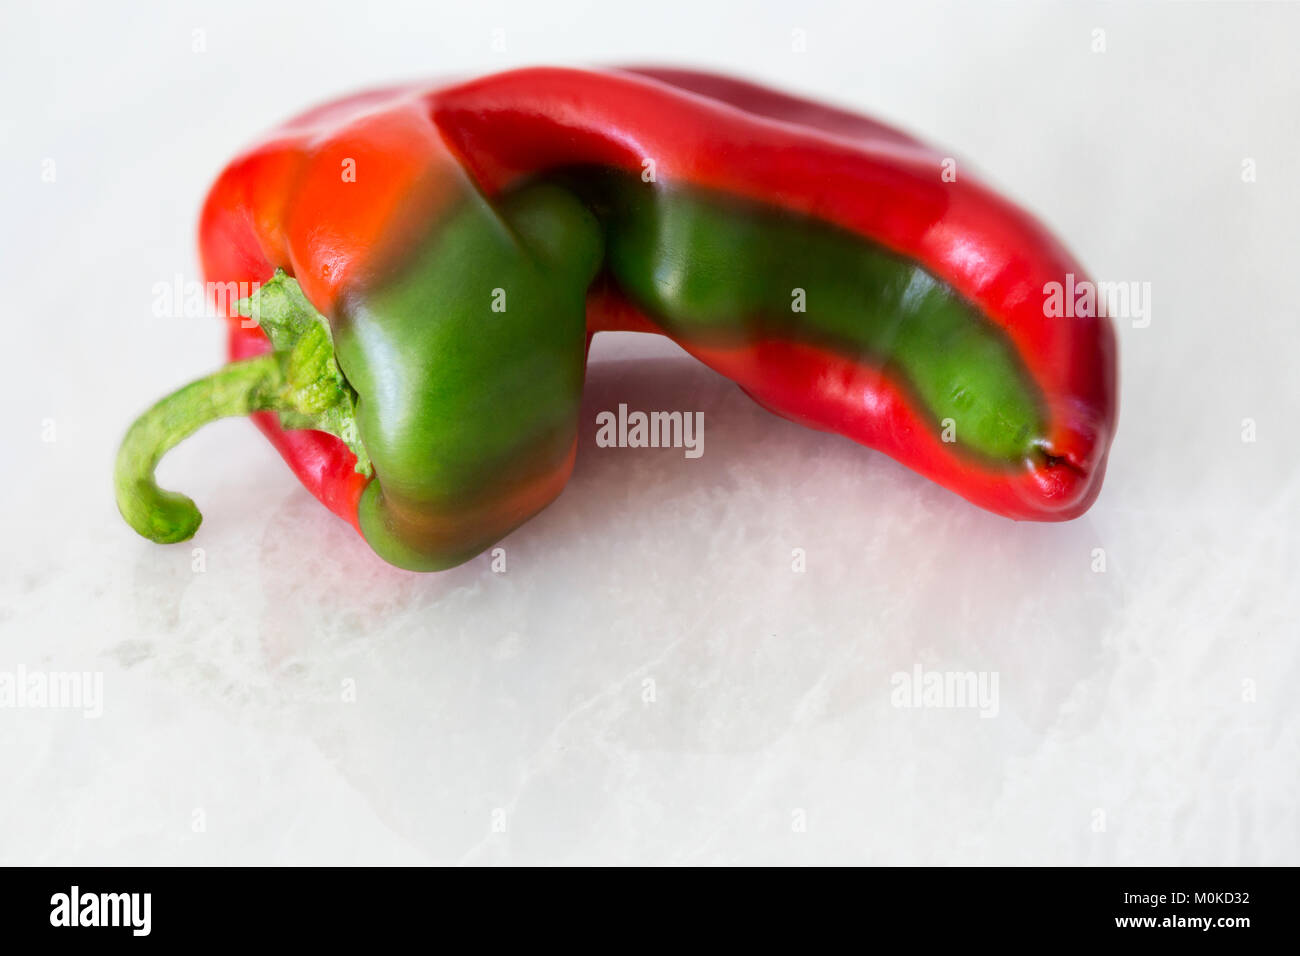 A red bell pepper in a unique shape and with a green stripe laying on a marble counter Stock Photo